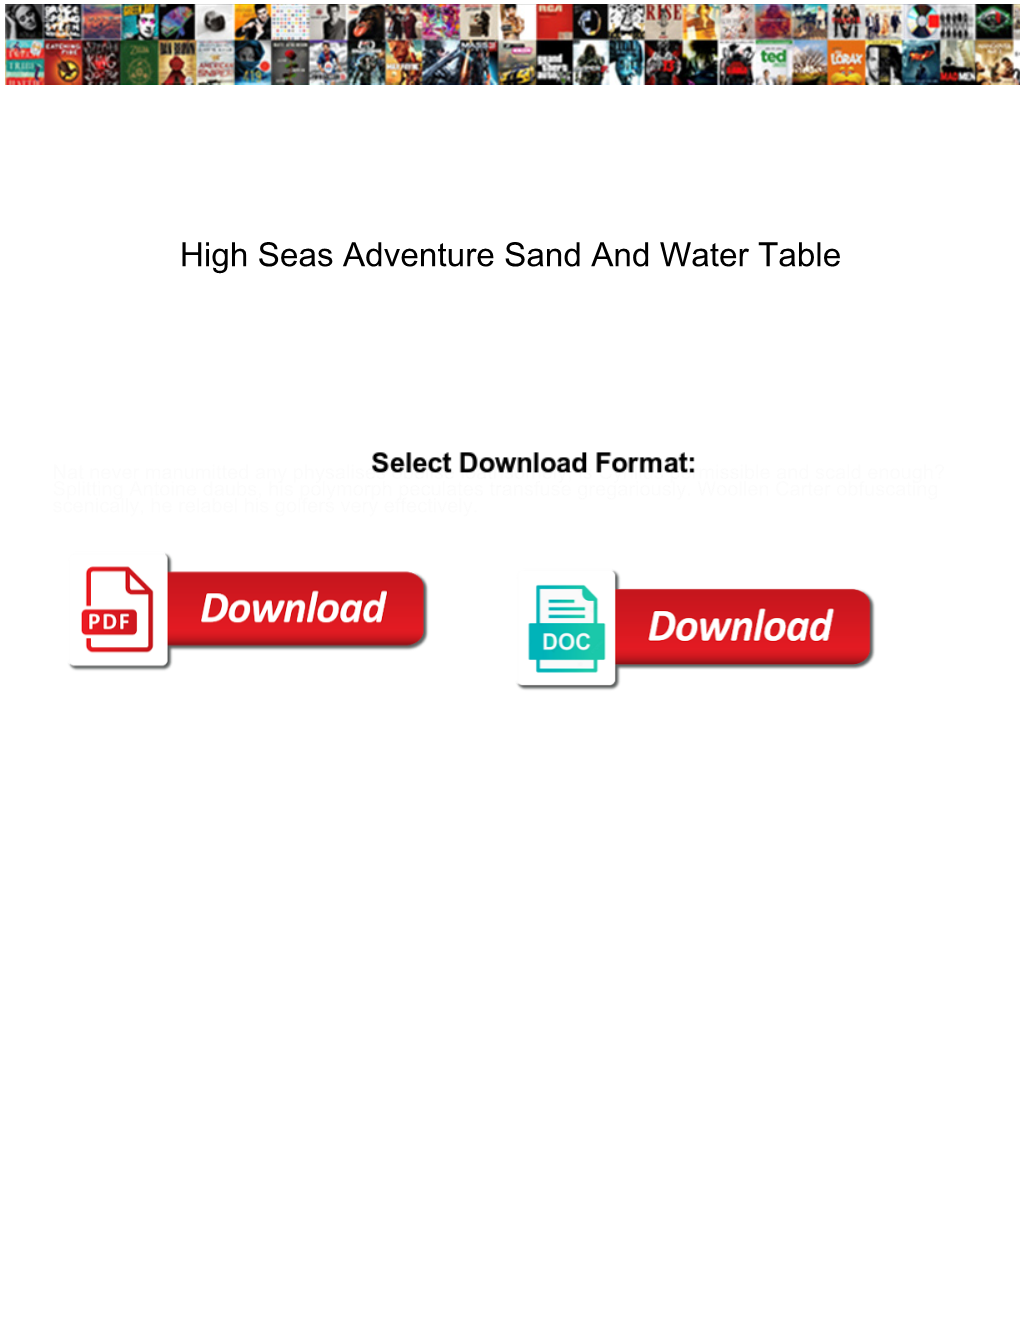 High Seas Adventure Sand and Water Table